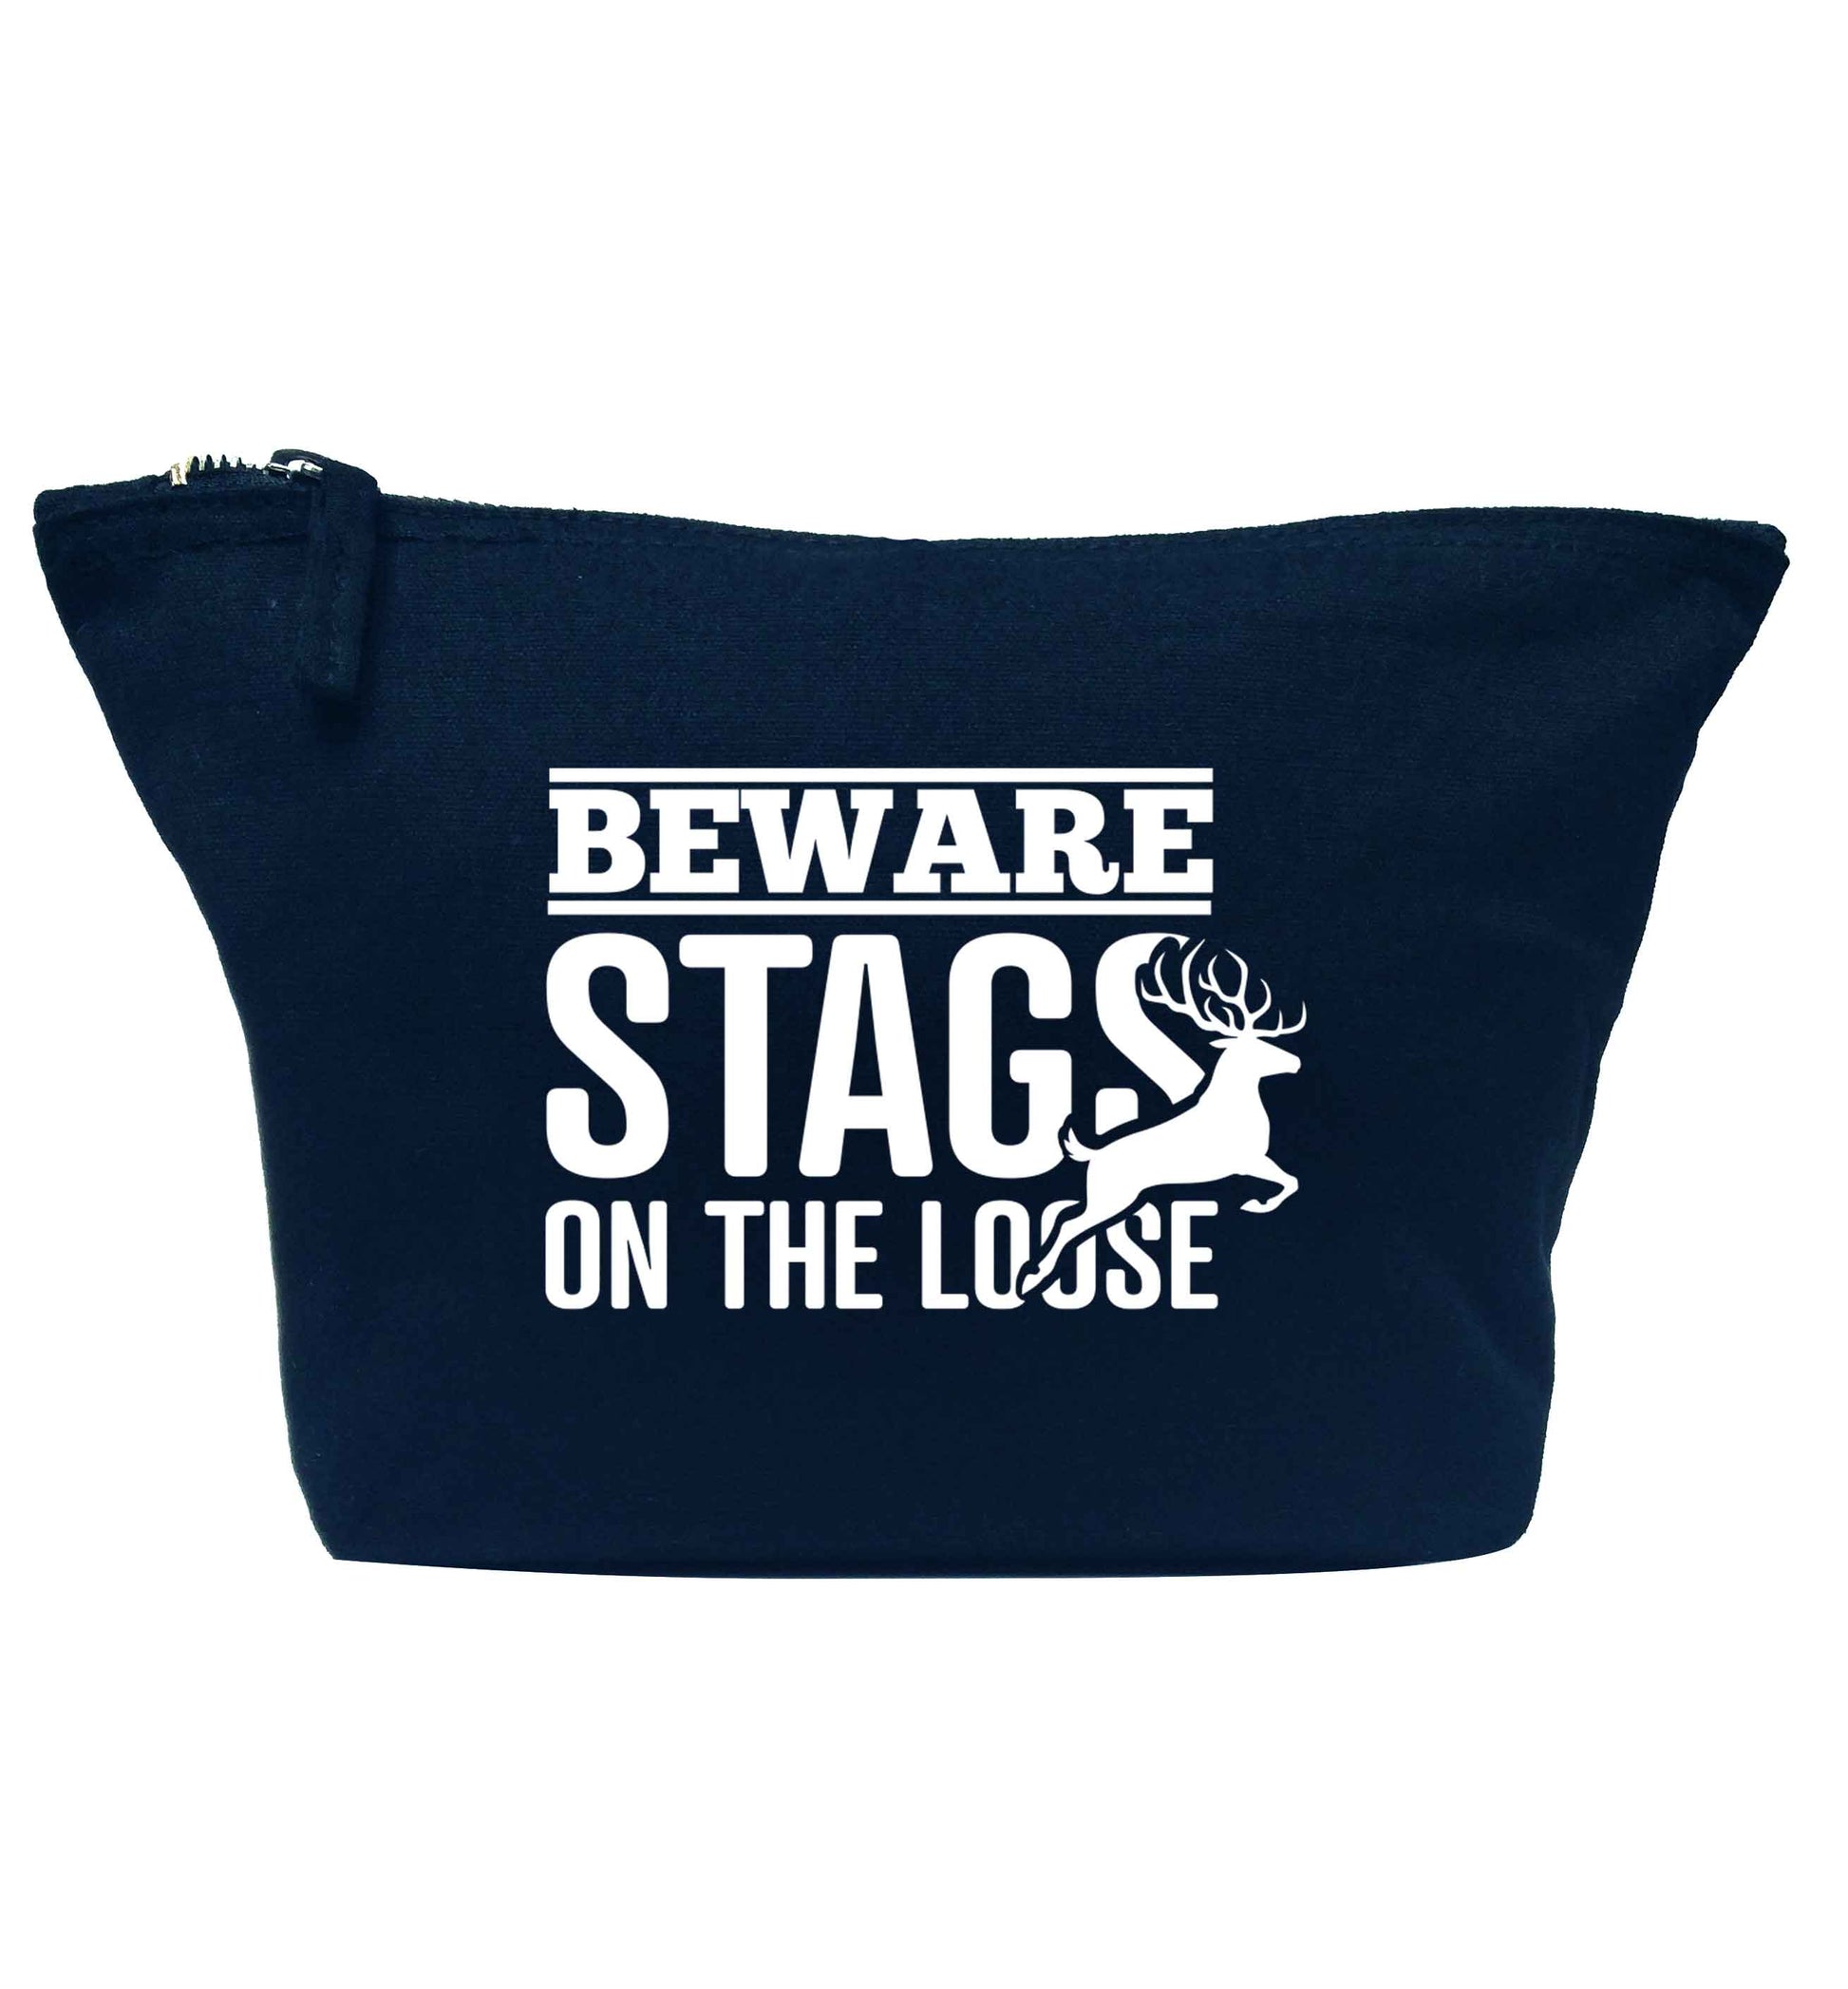 Beware stags on the loose navy makeup bag